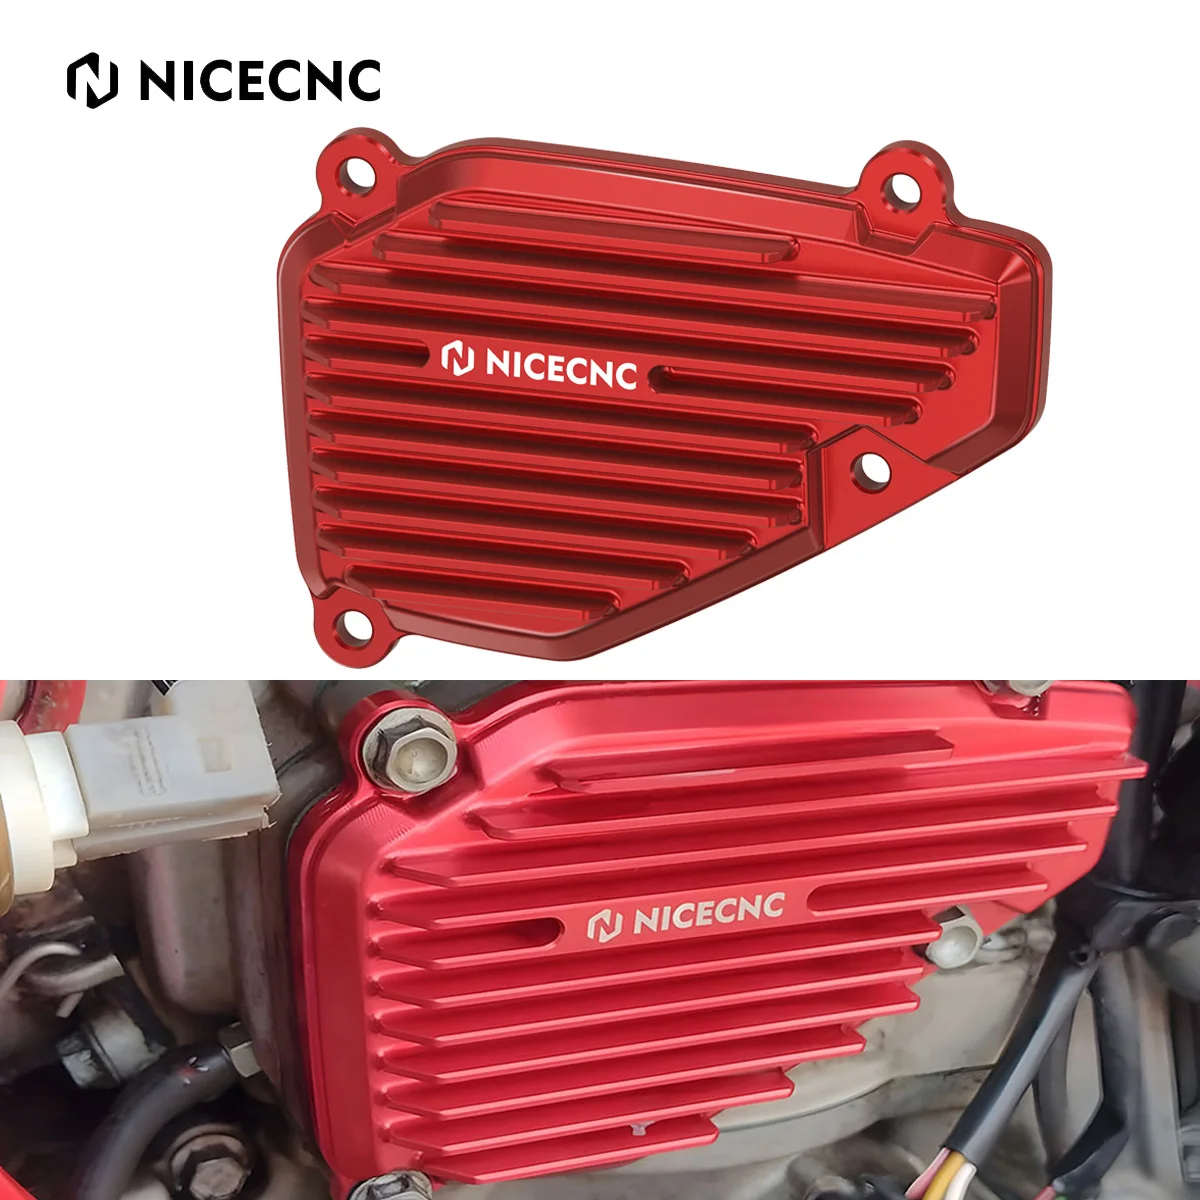 

NiceCNC Exhaust Power Valve Cover Guard Protector Spacer Gasket for Beta RR XTRAINER 250 300 2013-2022 2021 Heat Sink Cooling